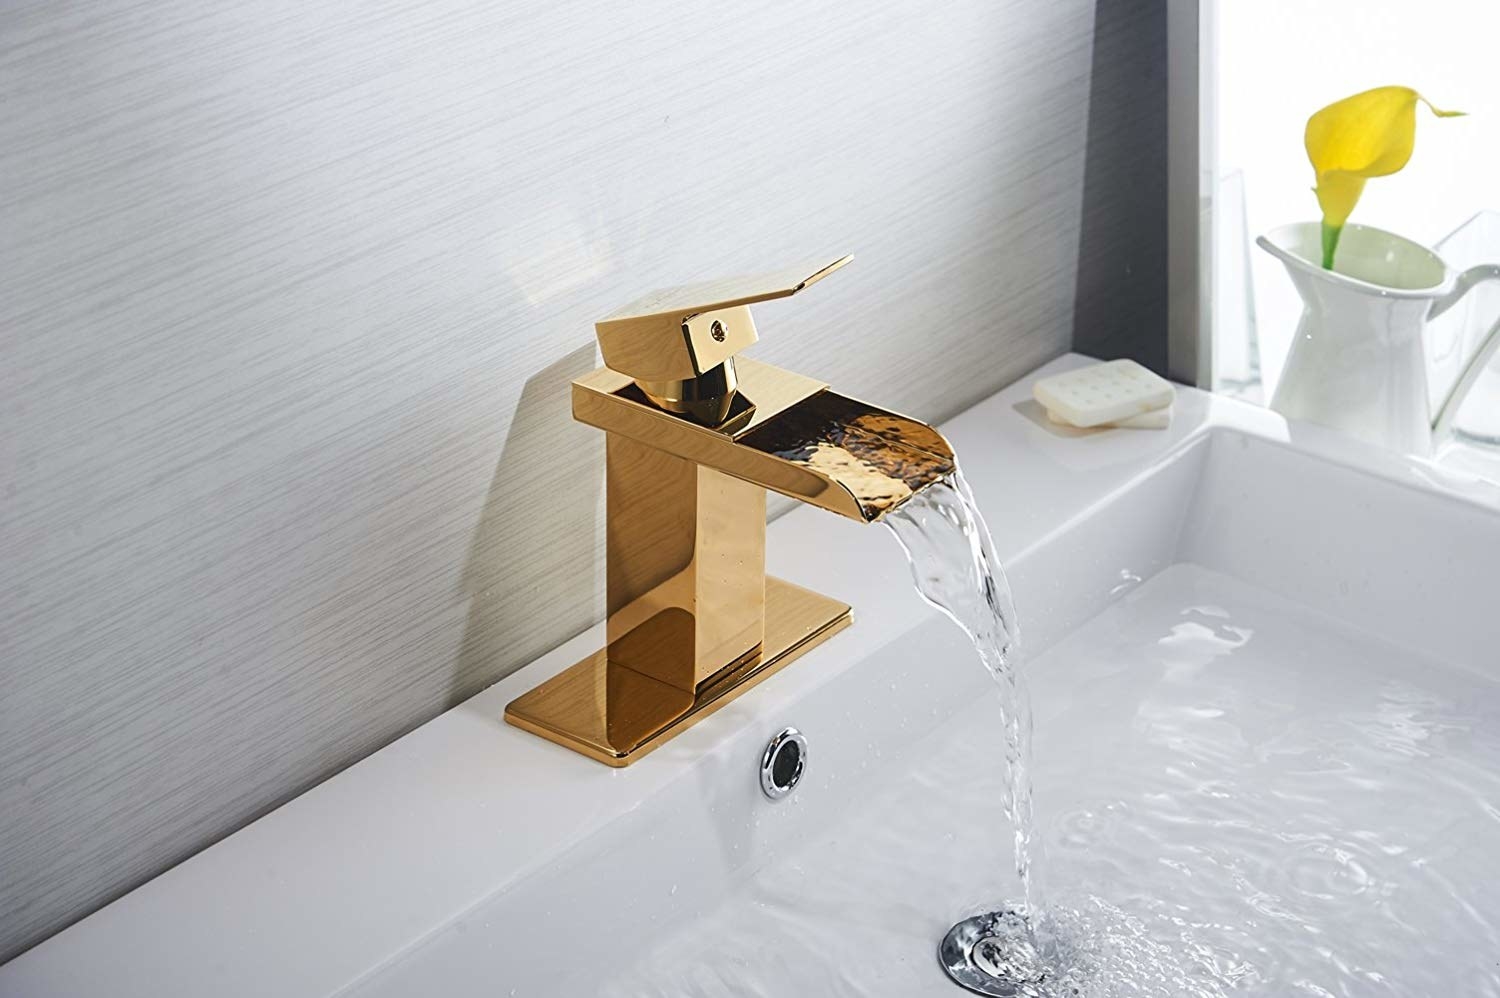 Gold waterfall faucet pouring out water into a sink